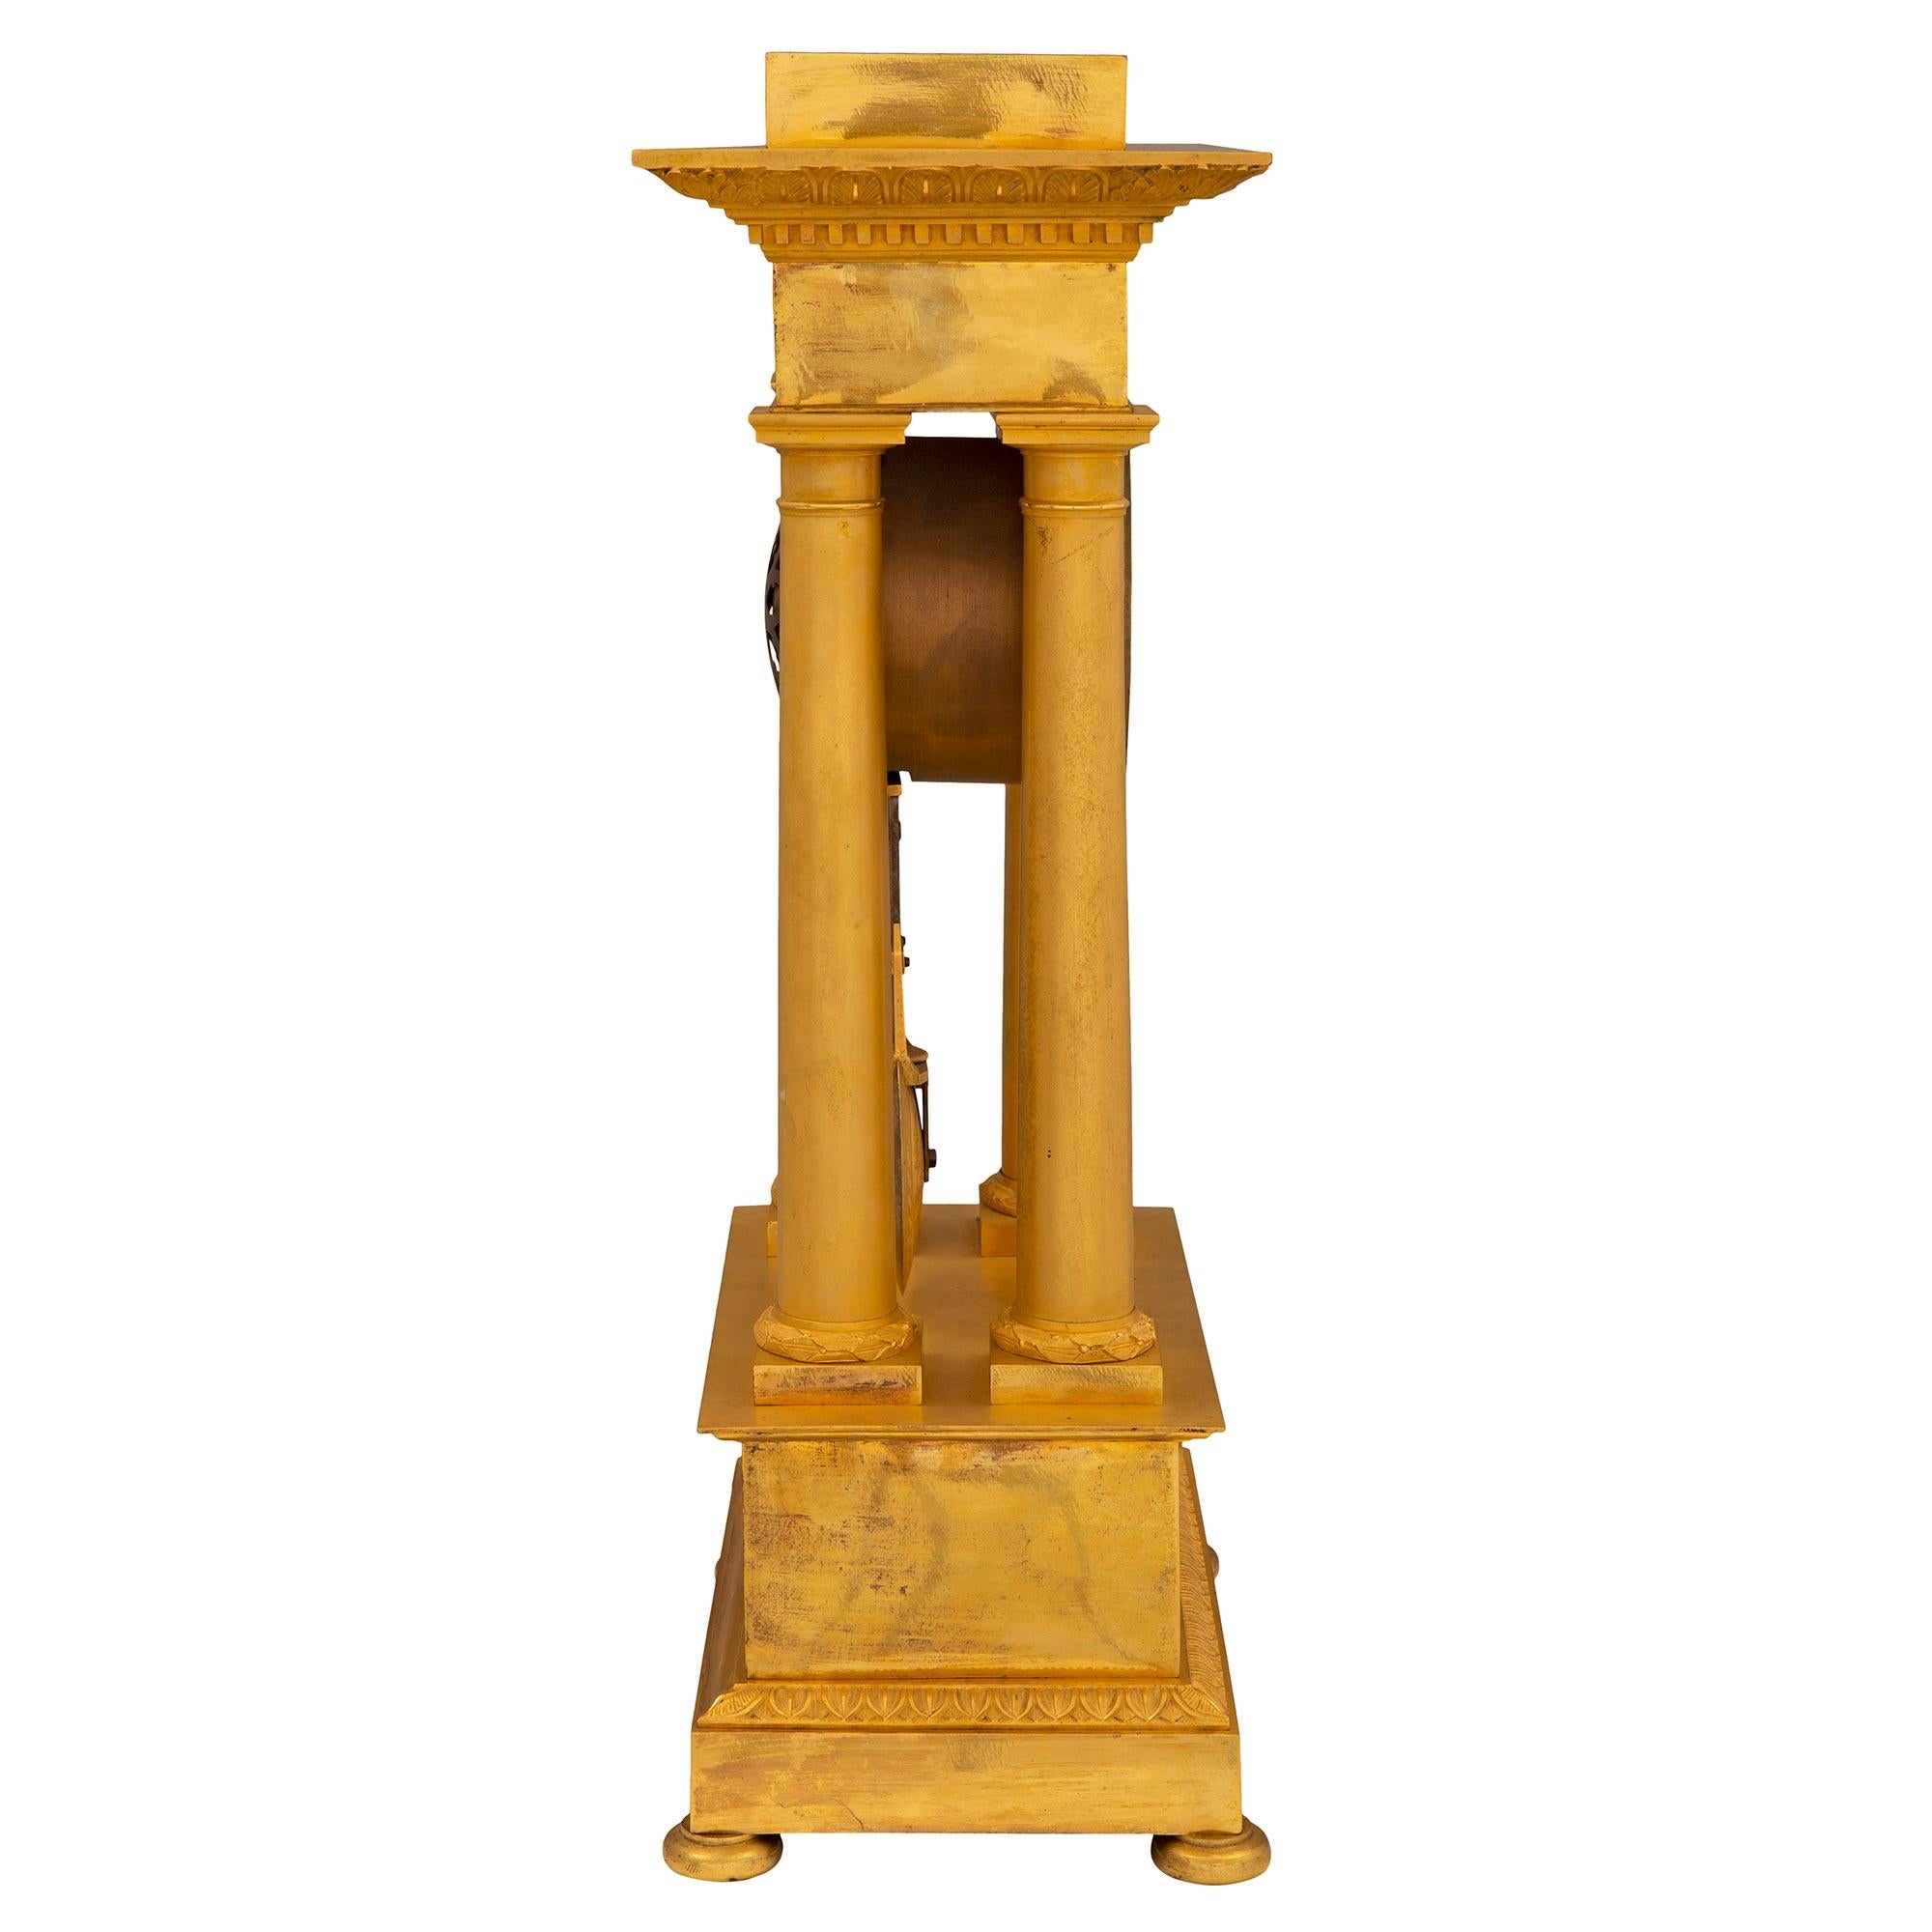 French Mid 19th Century Charles X Period Ormolu Portico Clock In Good Condition For Sale In West Palm Beach, FL